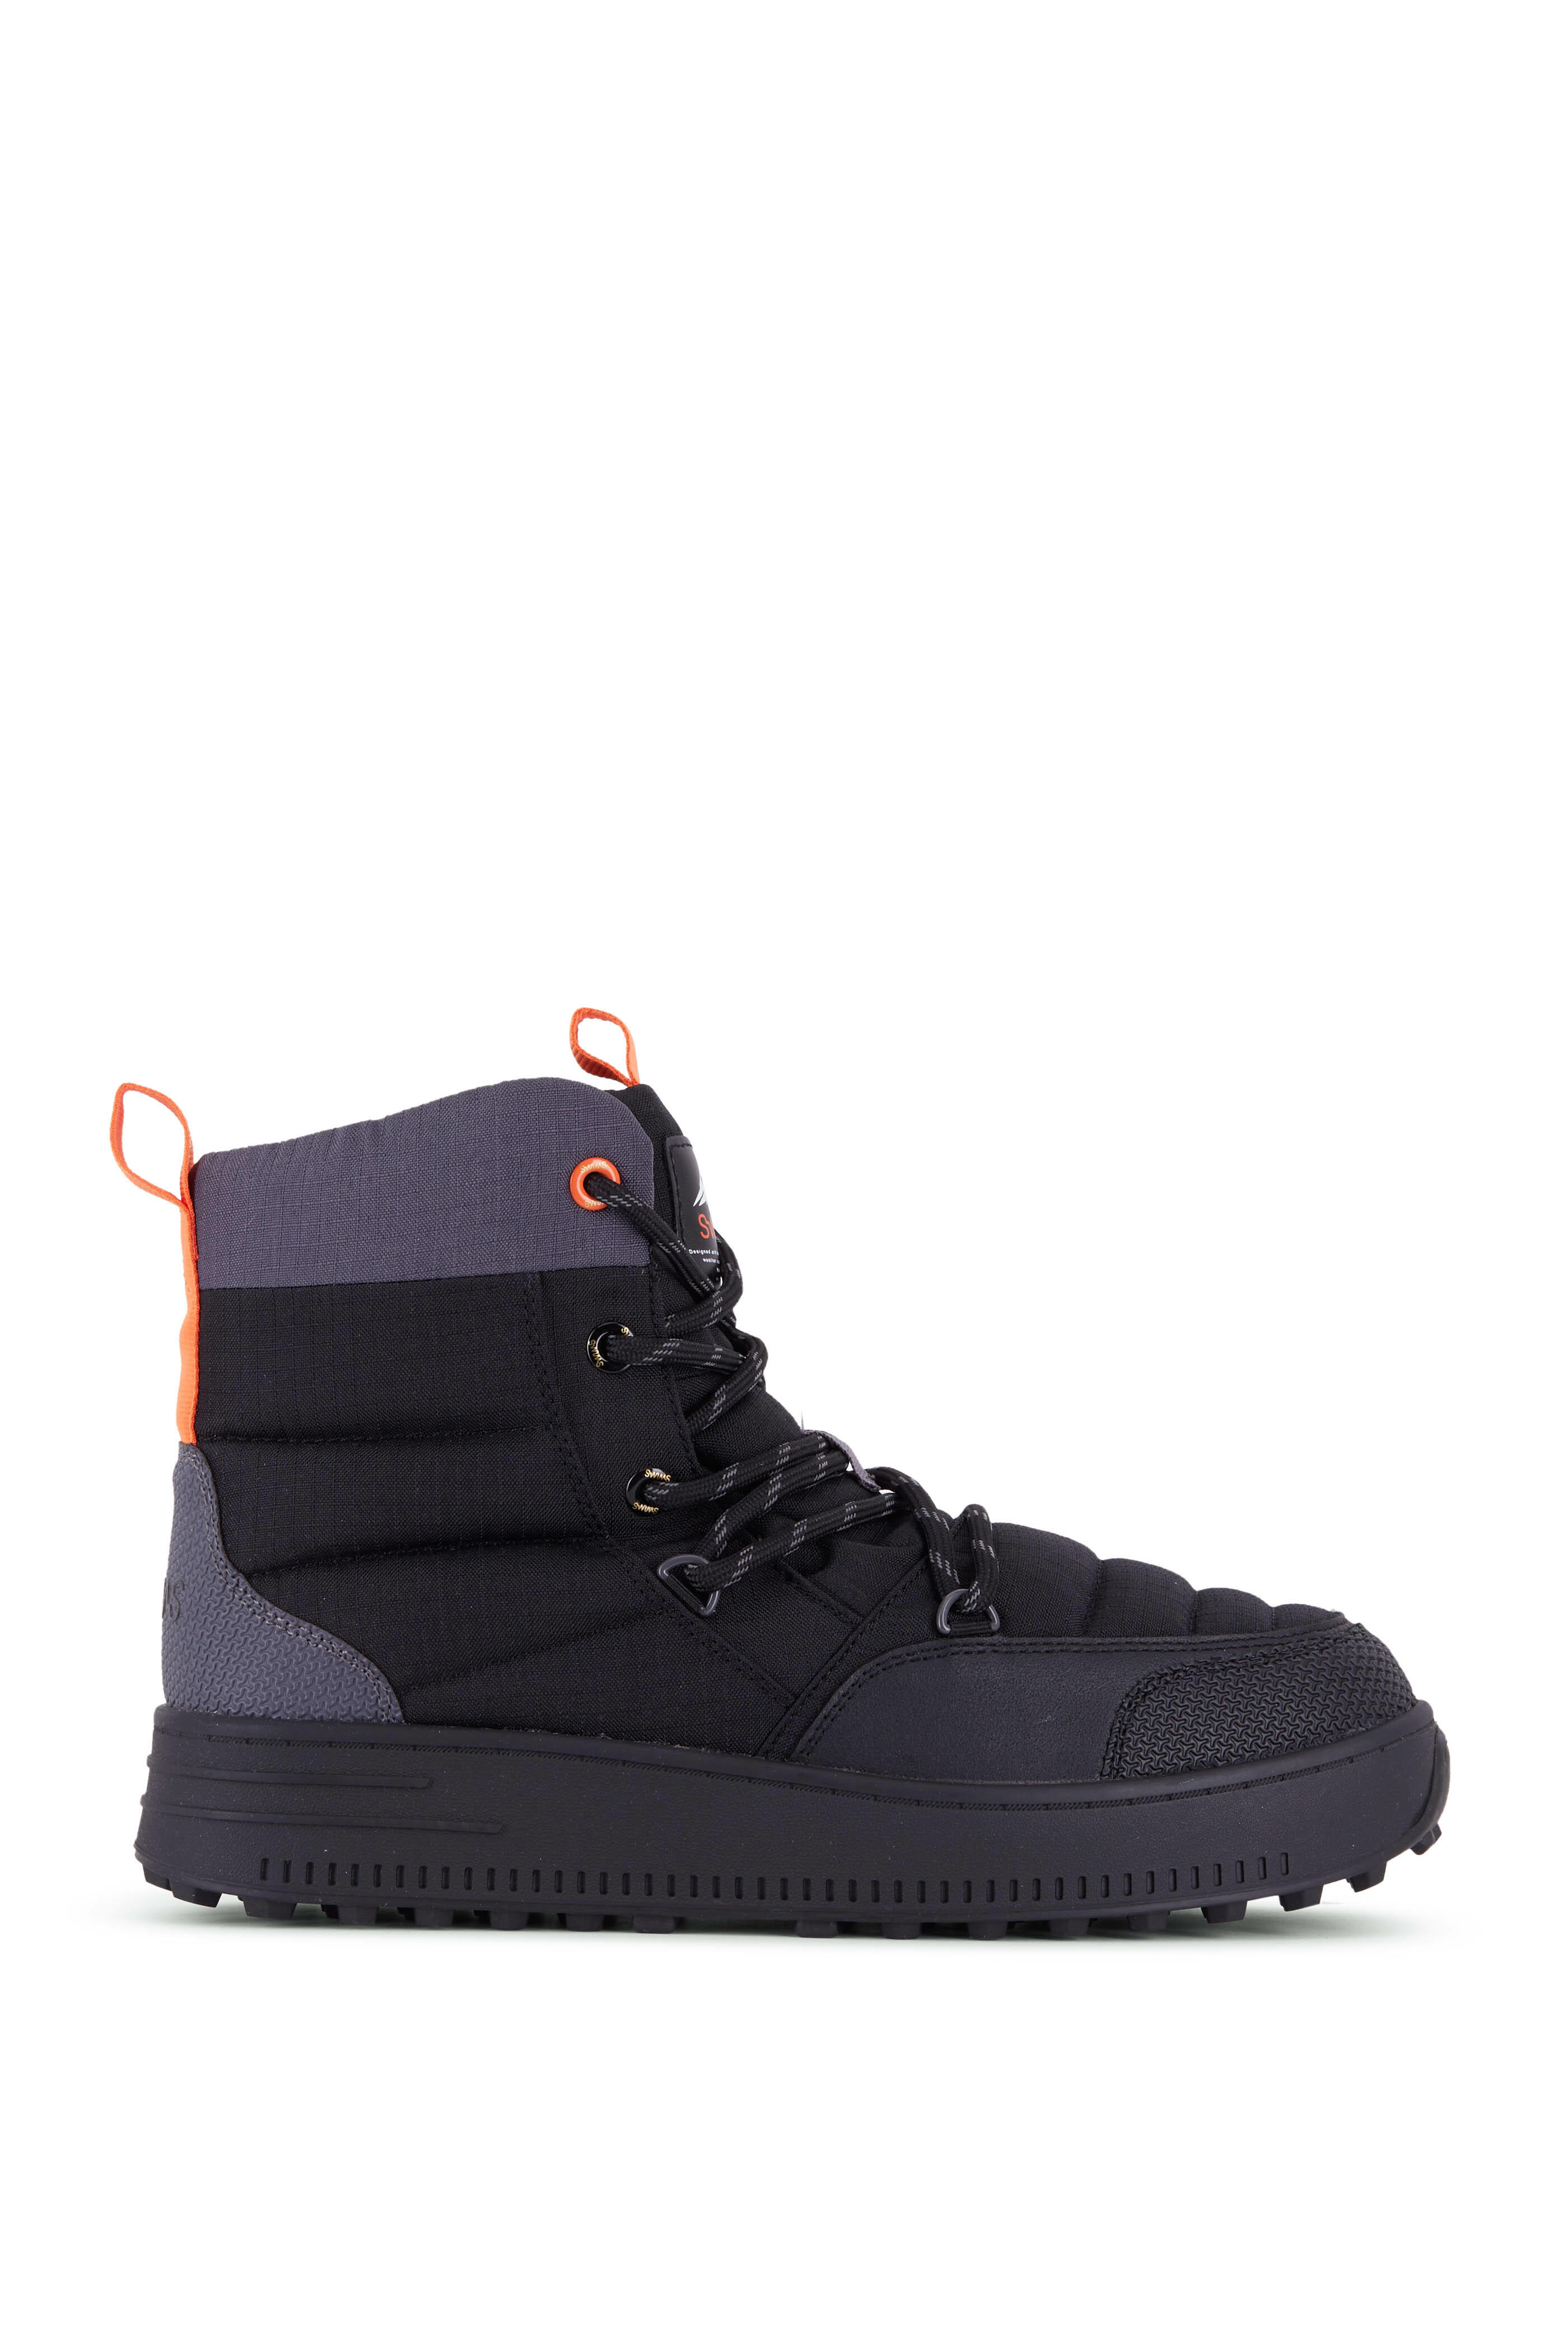 Swims - Snow Runner Black Boot | Mitchell Stores